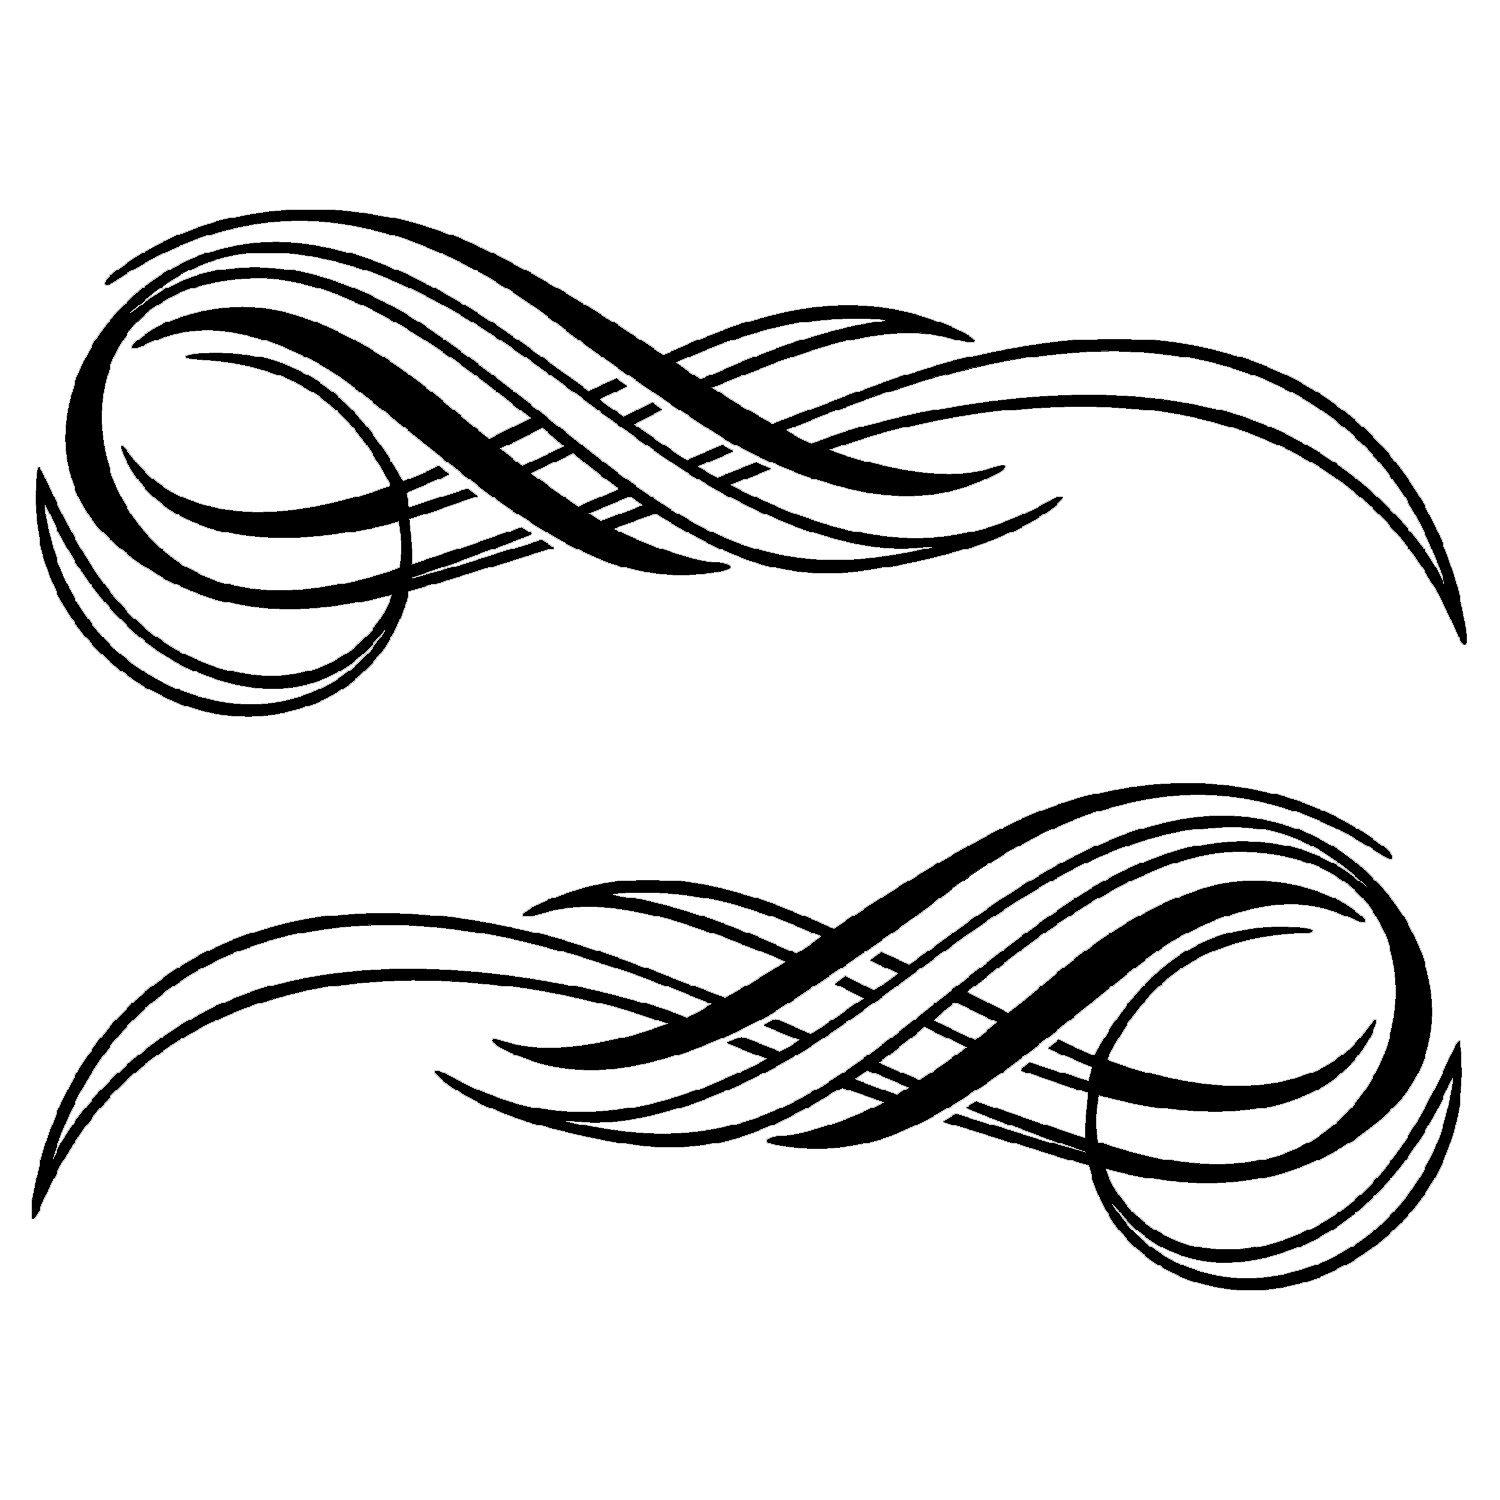 High-Quality Vinyl Pinstripe / Scroll Decal -Many Colors & Sizes- 